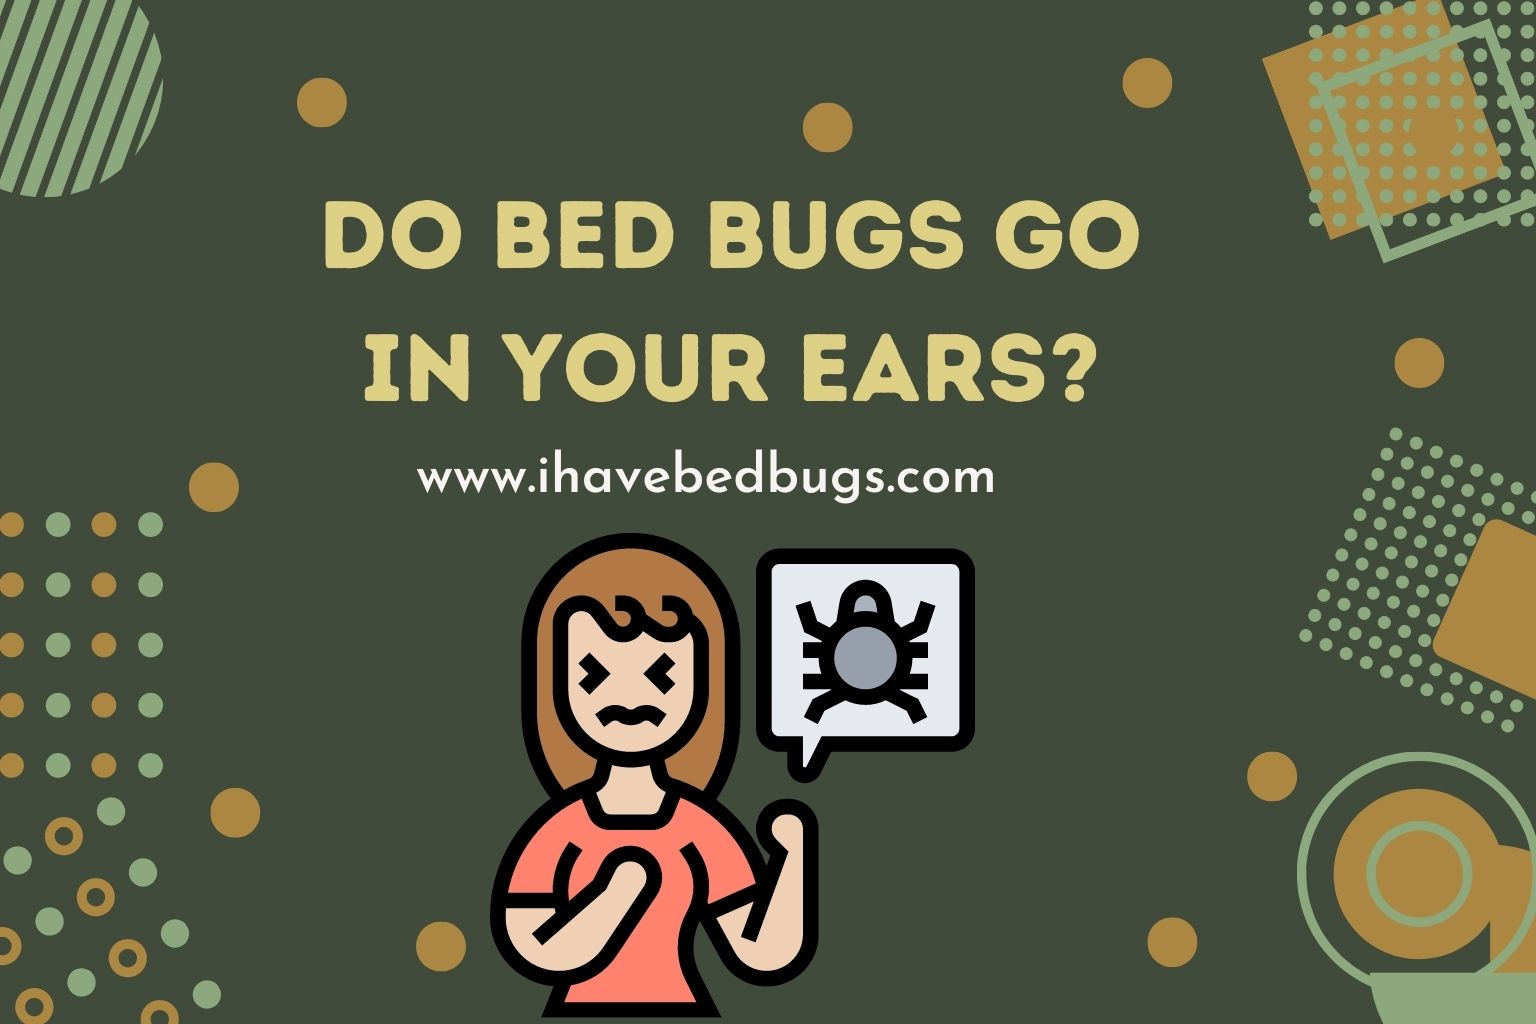 Do bed bugs go in your ears